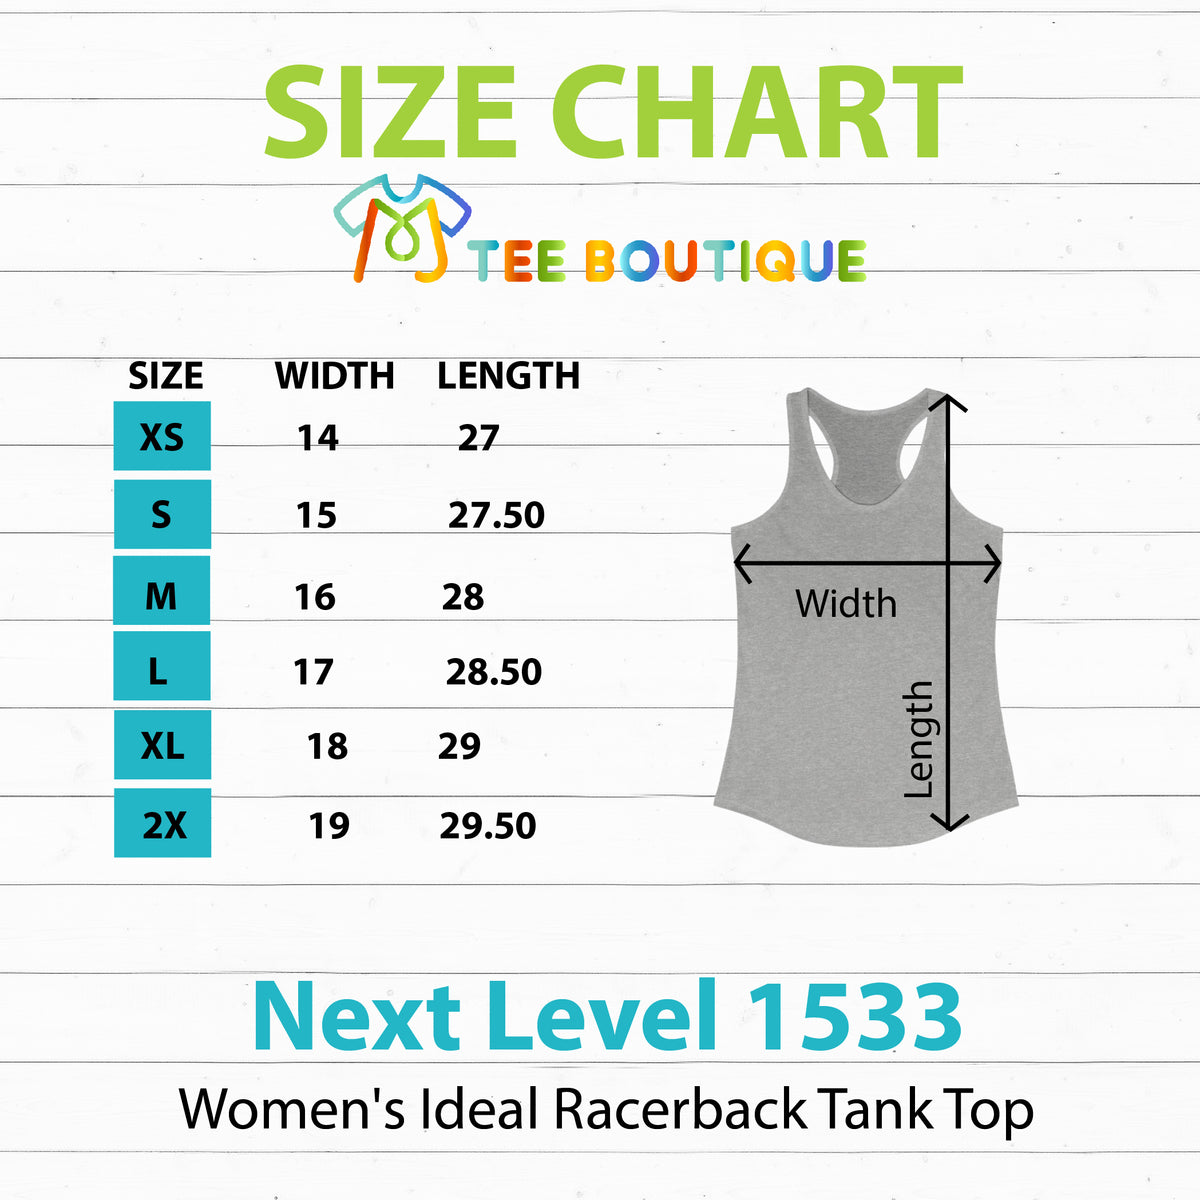 Abs Workout Chair Yoga Shirt | Funny Workout Shirt | Gift For Him | Gift For Her | Women's Slim-fit Racerback Tank Top